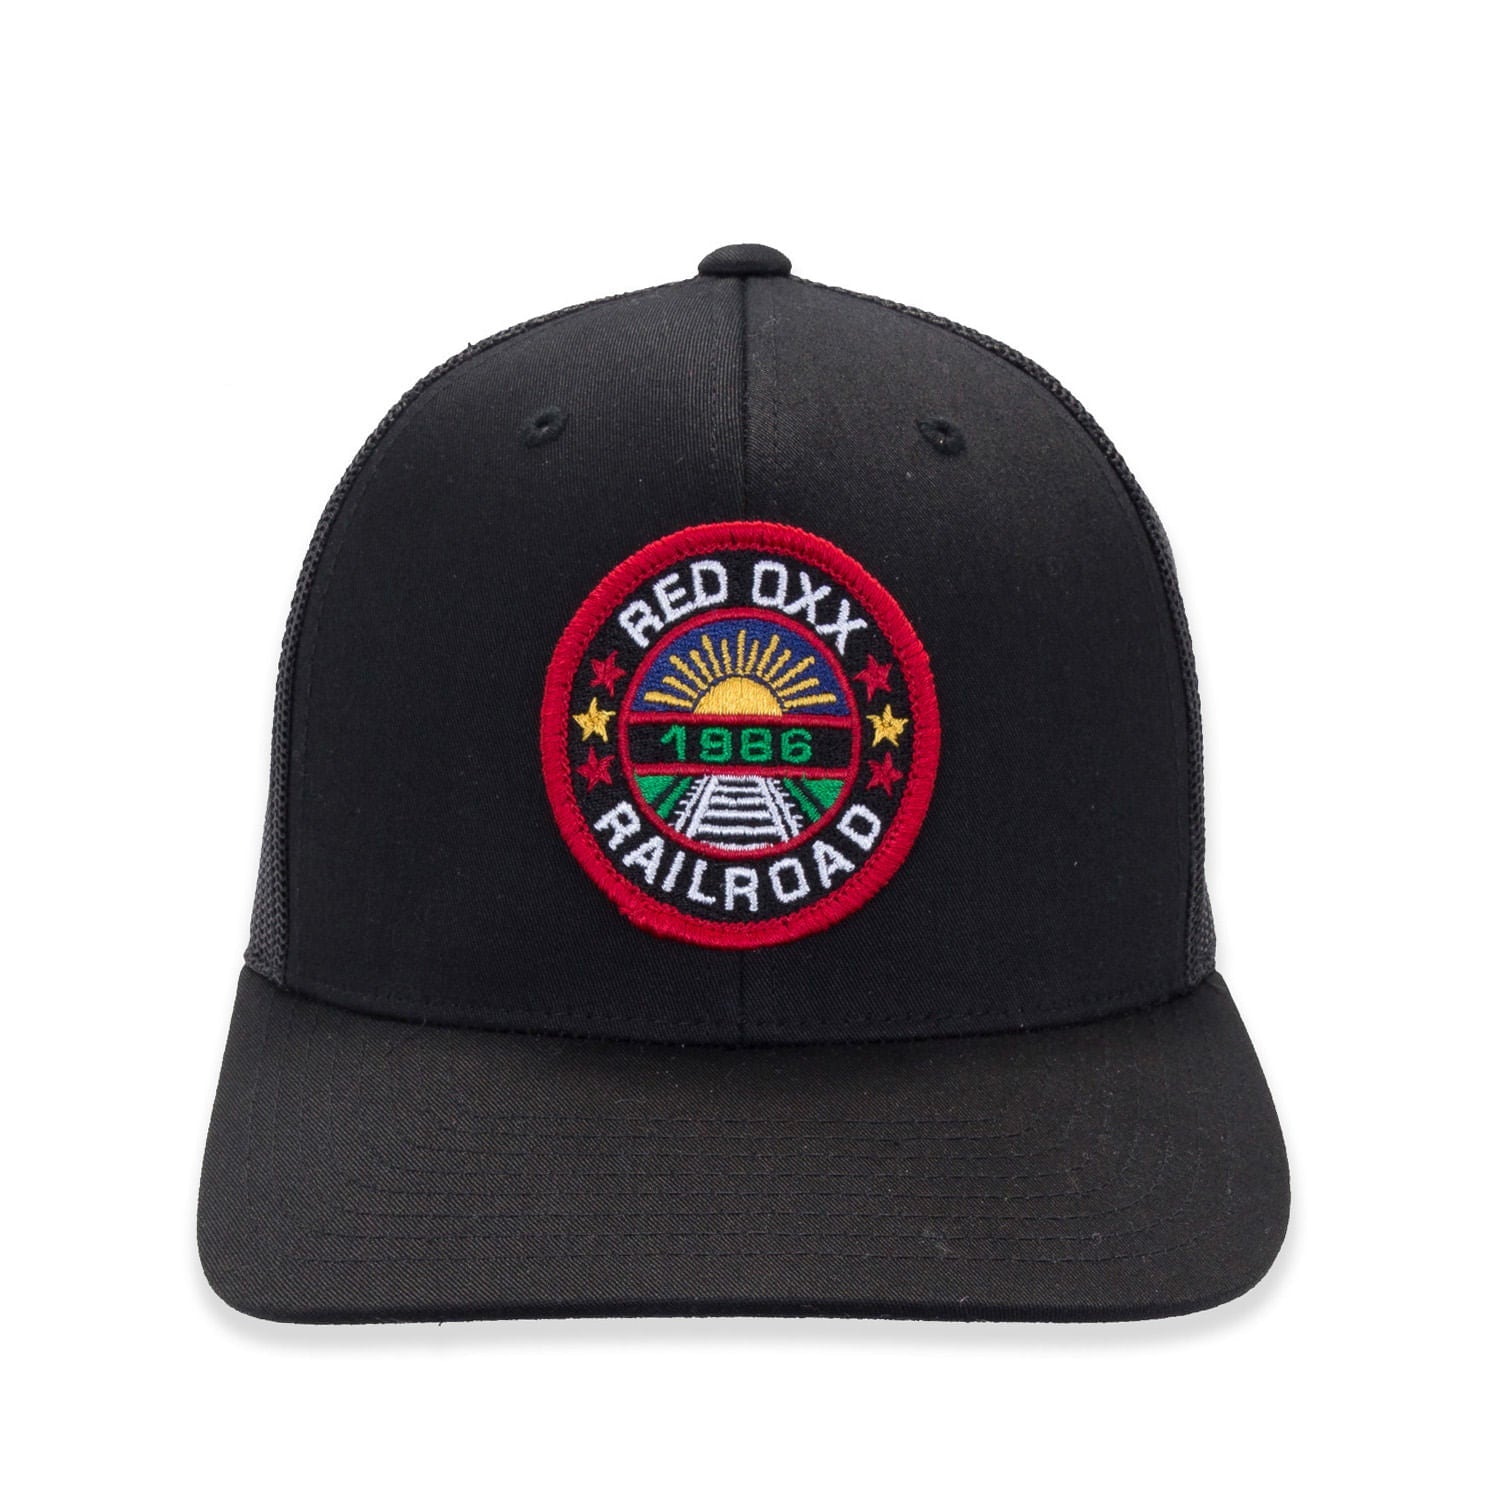 Red Oxx Railroad Patch trucker hat. 